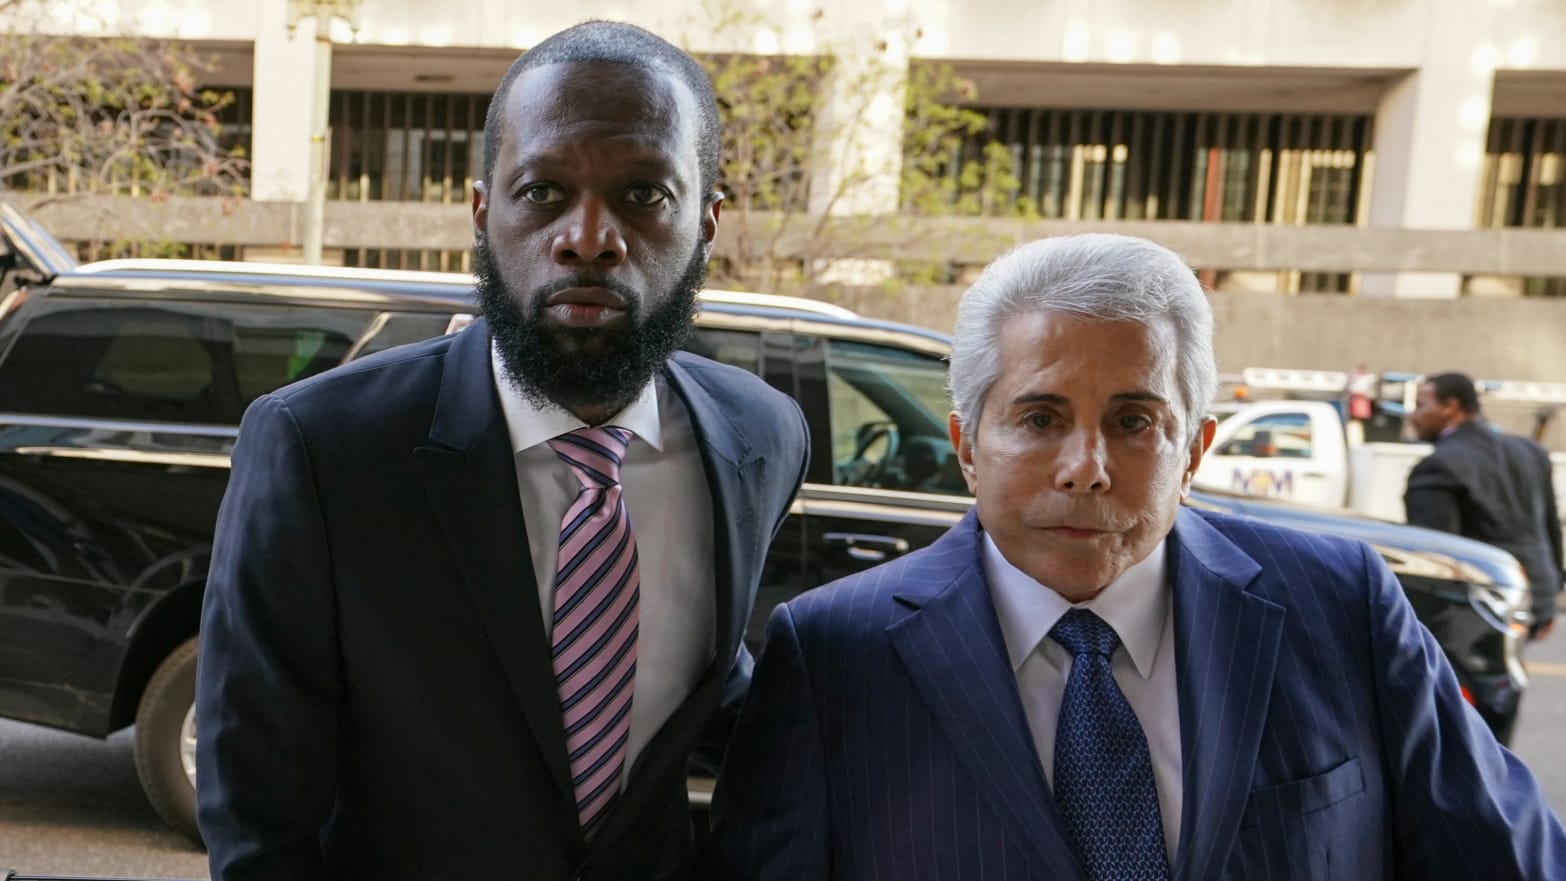 Grammy award-winning Fugees rapper Prakazrel (Pras) Michel, who is facing criminal charges in an alleged illegal lobbying campaign, arrives with his lawyer David Kenner for opening arguments in his trial at U.S. District Court